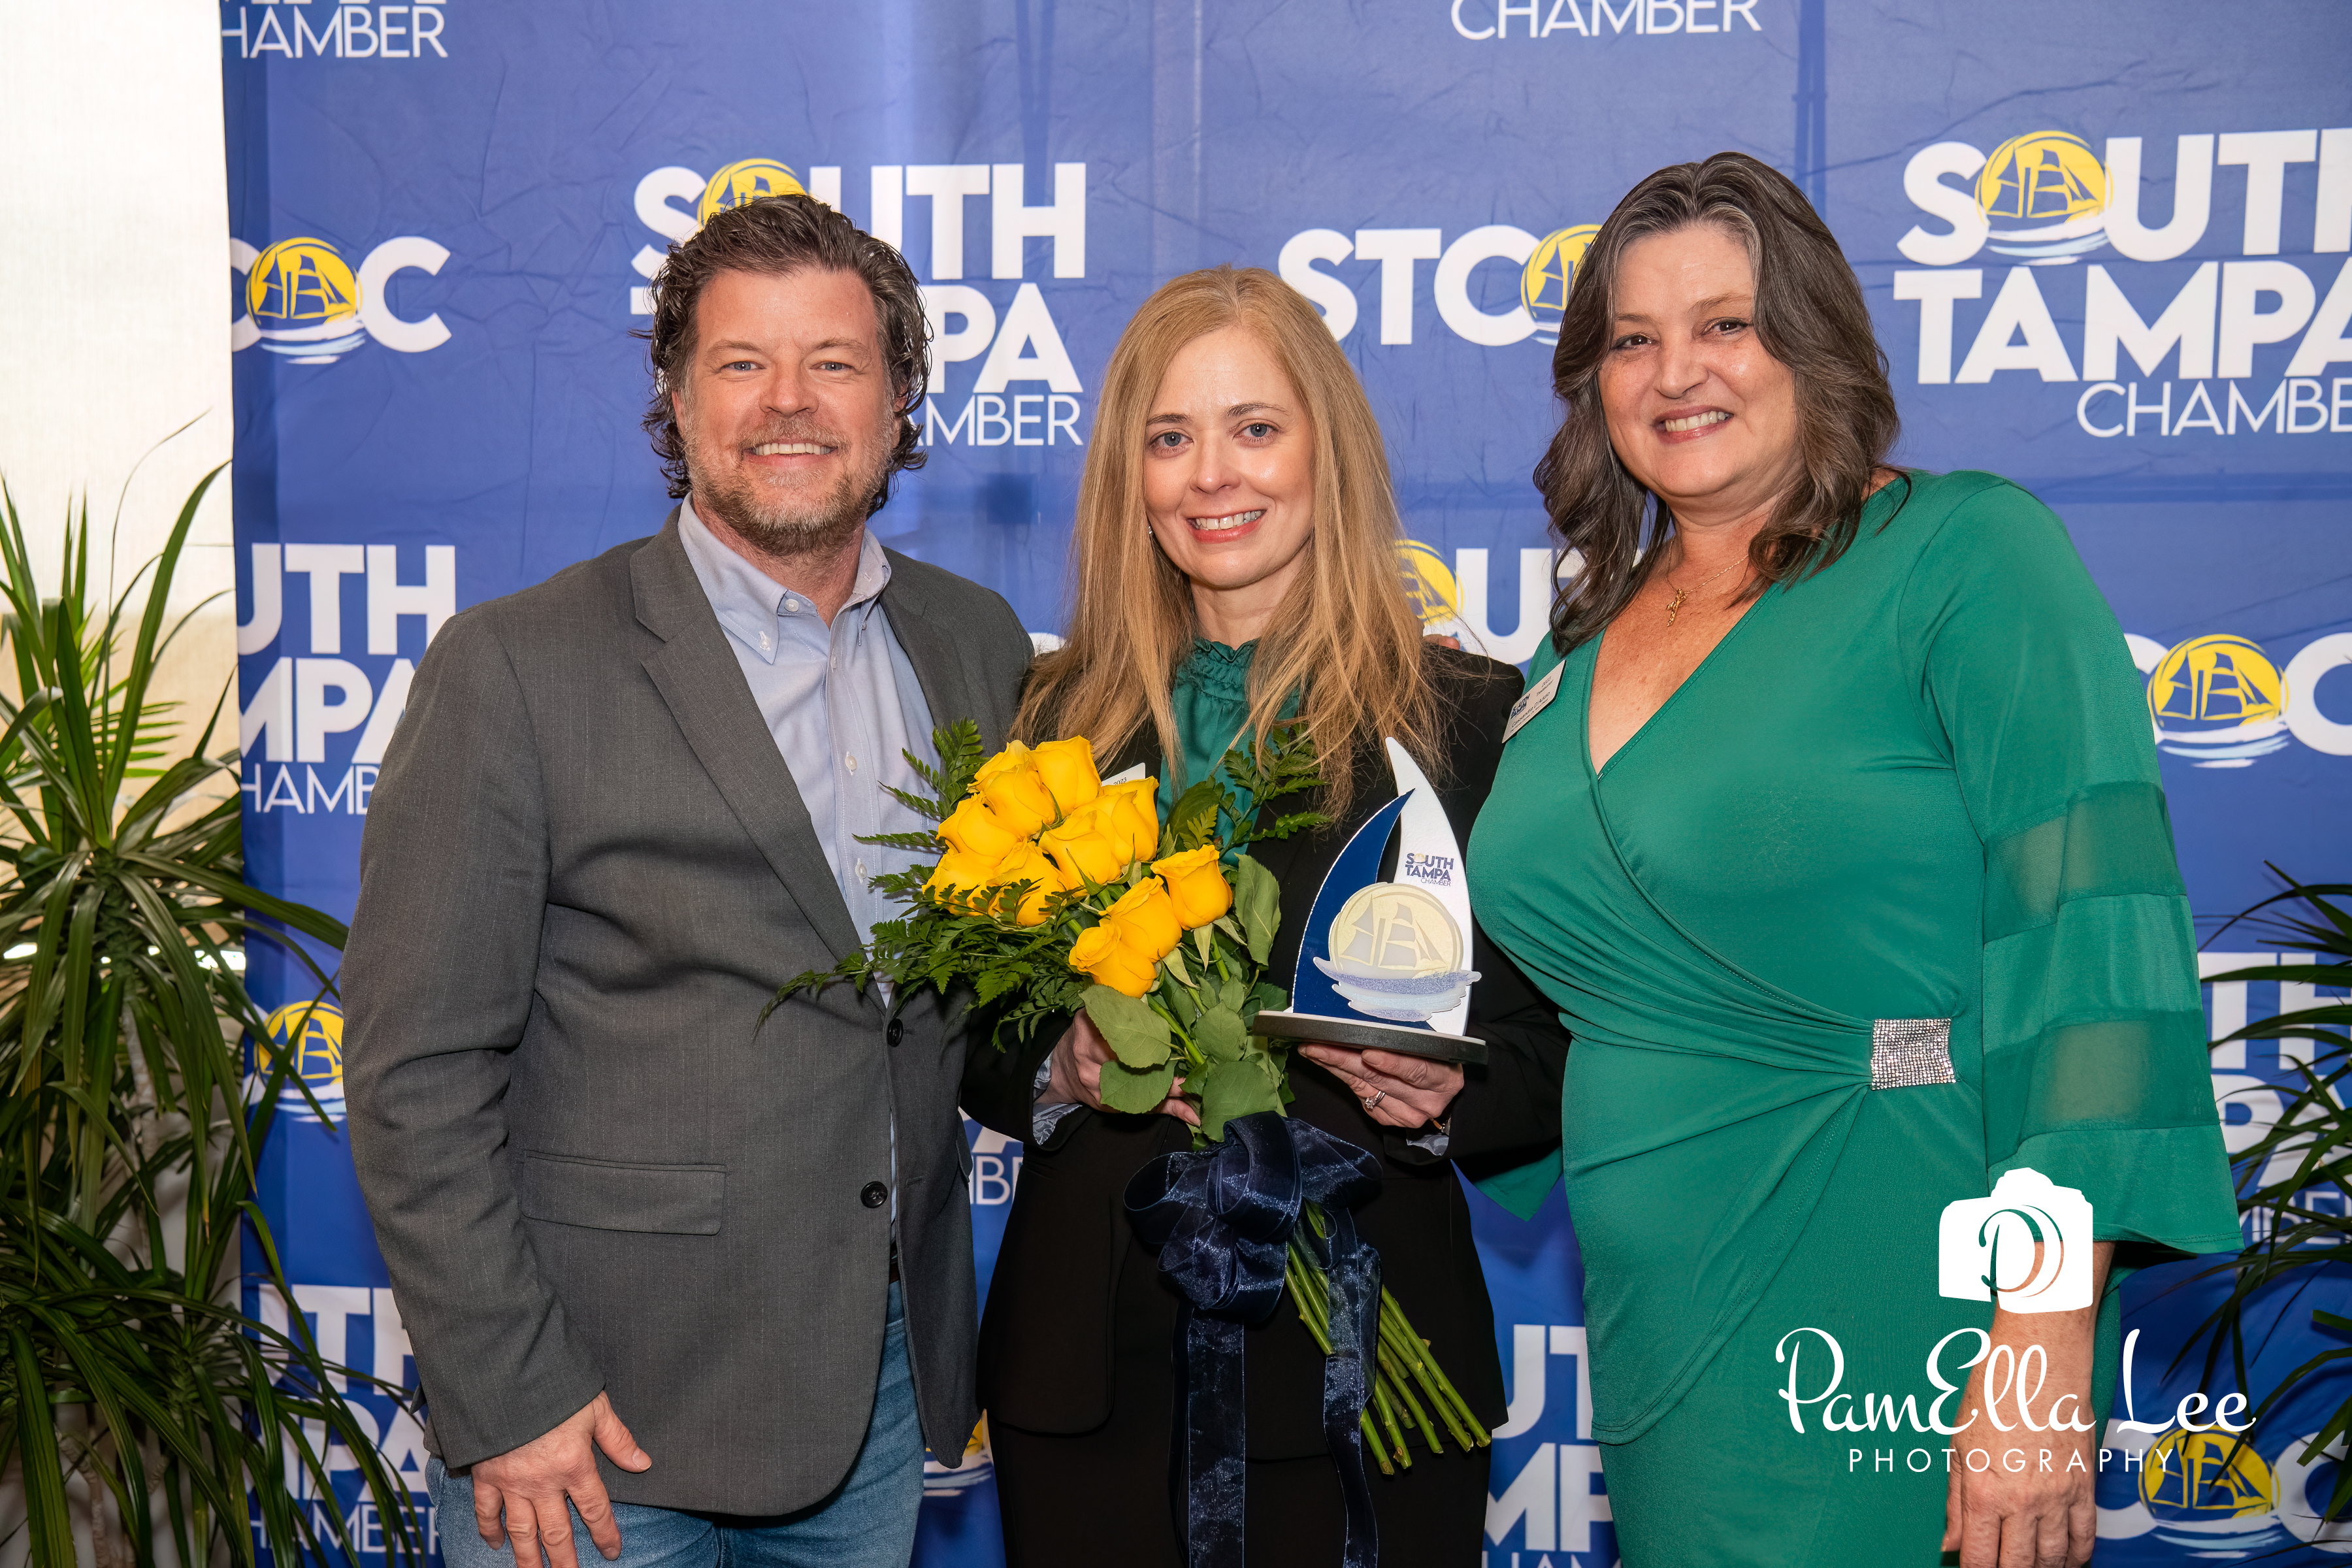 South Tampa Chamber Announces Award Winners